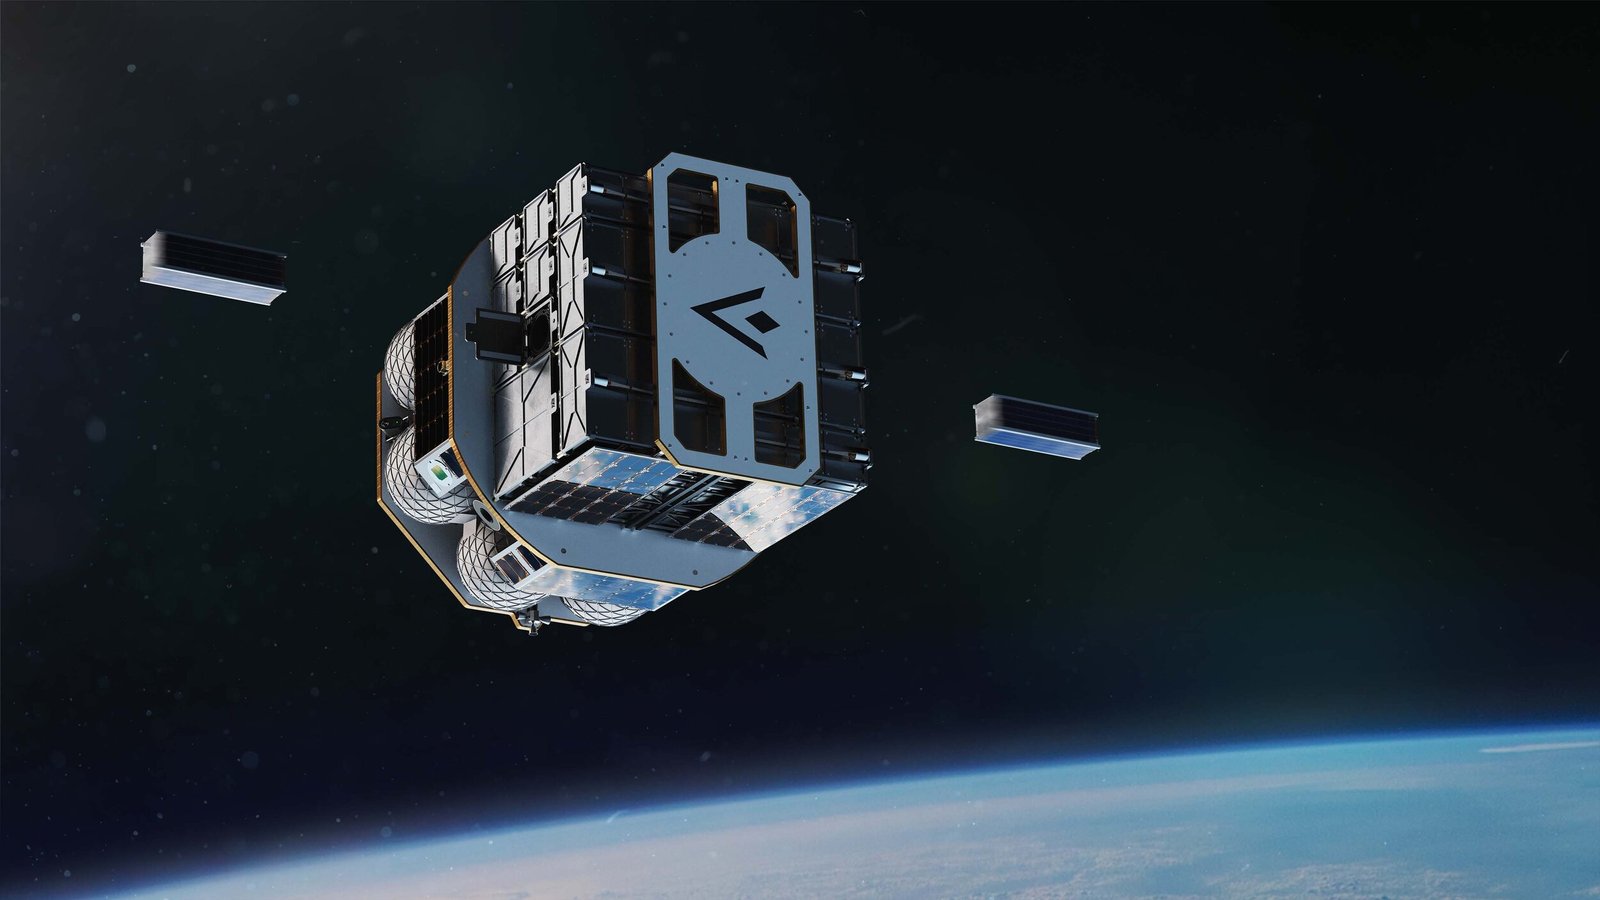 Orbiter, an orbital transfer vehicle being developed by Launcher, will be able to carry up to 90U of cubesats or other smallsats, and fly on both Launcher Light and SpaceX's Falcon 9. © Launcher